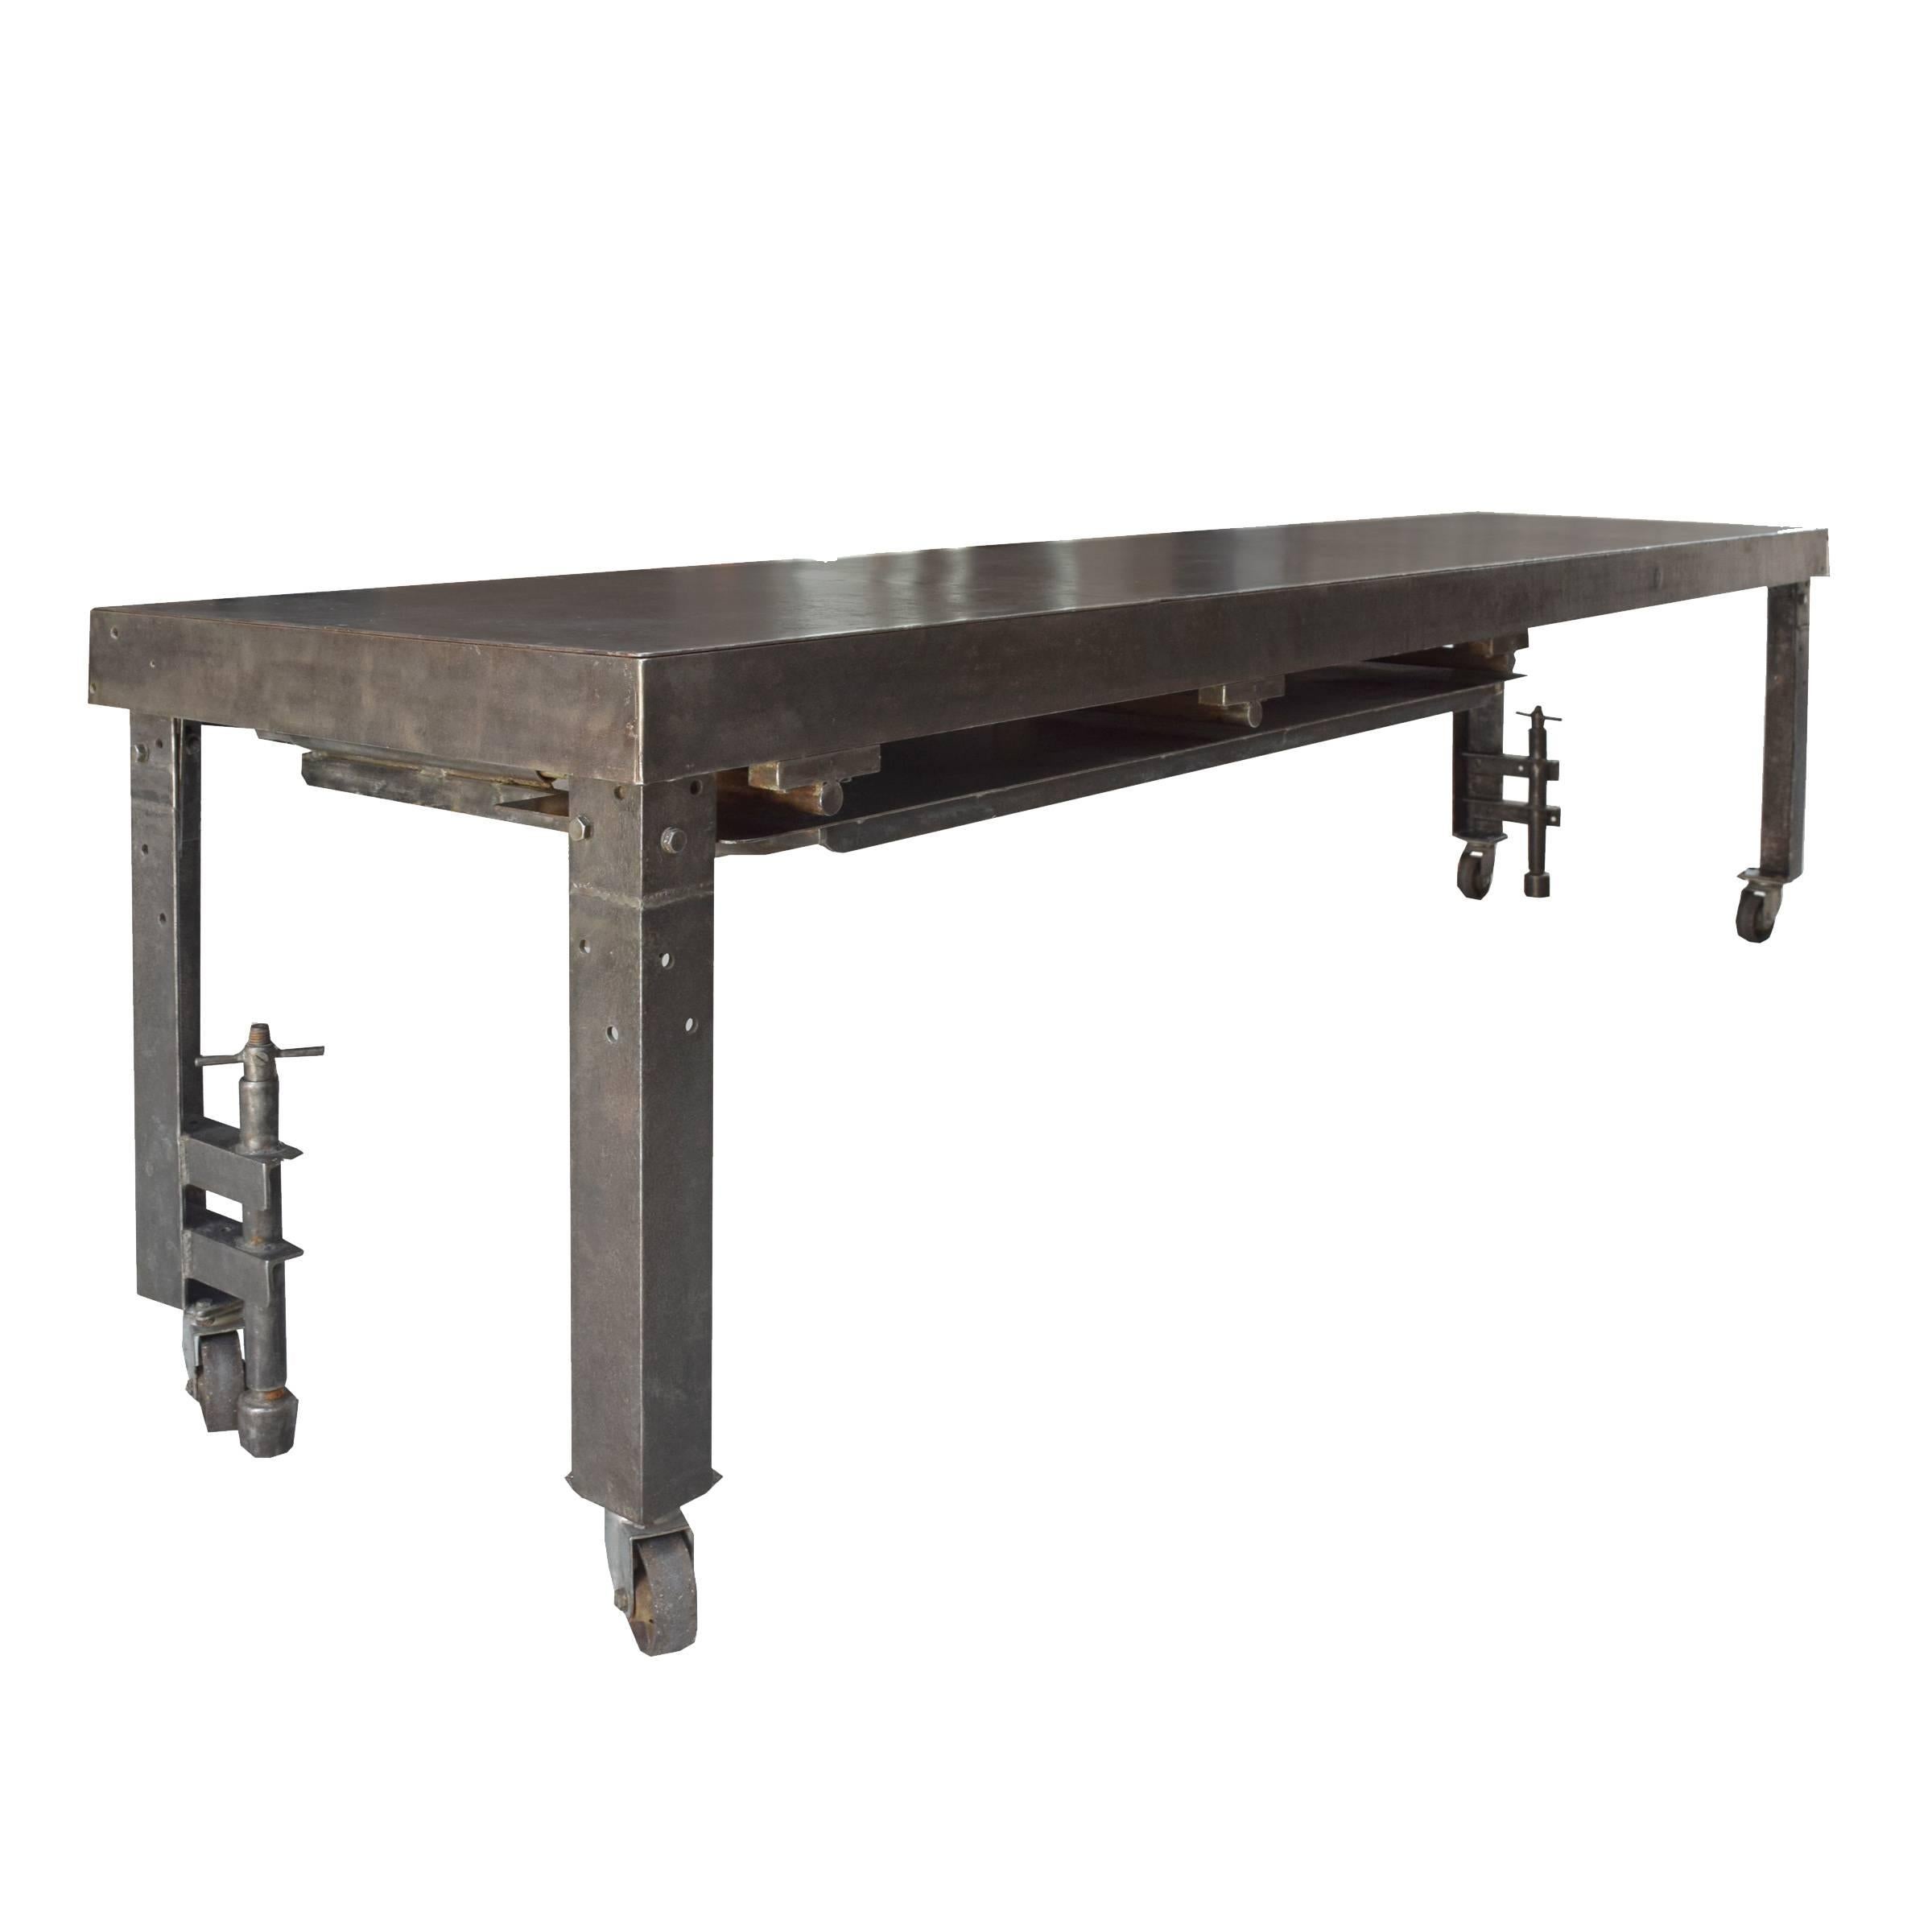 A metal industrial table from a candy factory raised on four legs ending on casters, two of which feature hand crank brakes. The table originally had tubing coils underneath to heat or cool the table top depending on the type of candy, early 20th